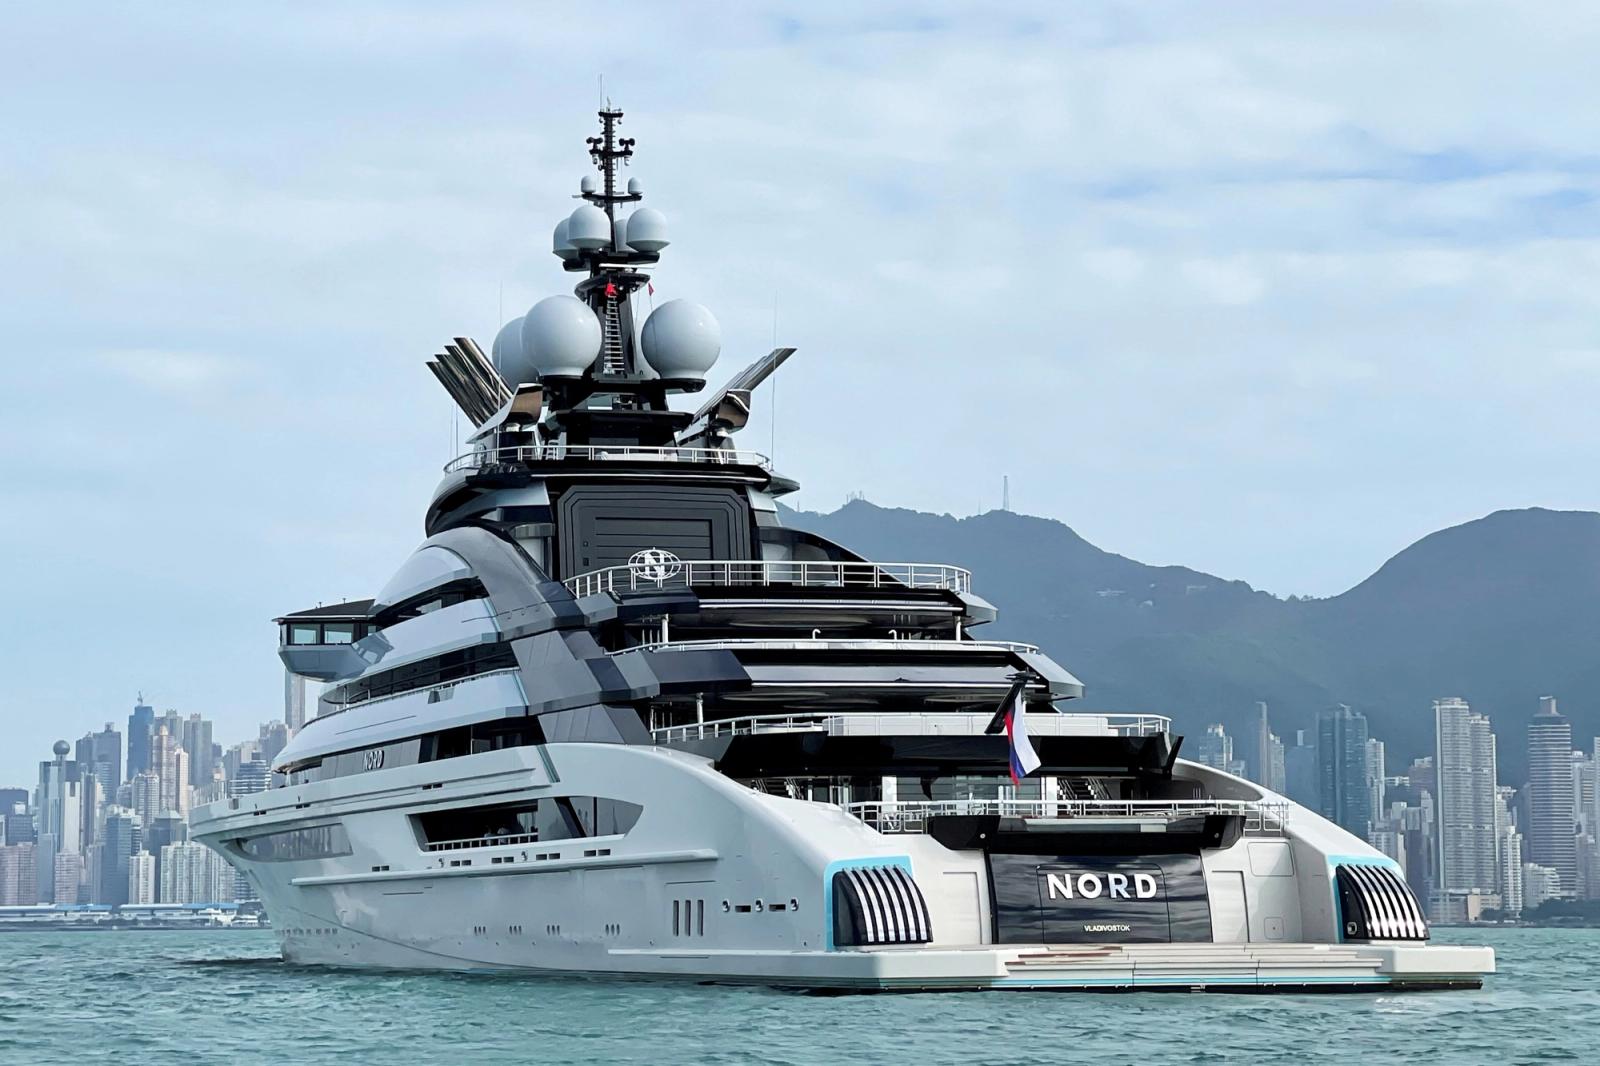 The 465-foot superyacht "Nord", reportedly owned by sanctioned Russian oligarch Alexei Mordashov is seen in Hong Kong, China, October 20, 2022.